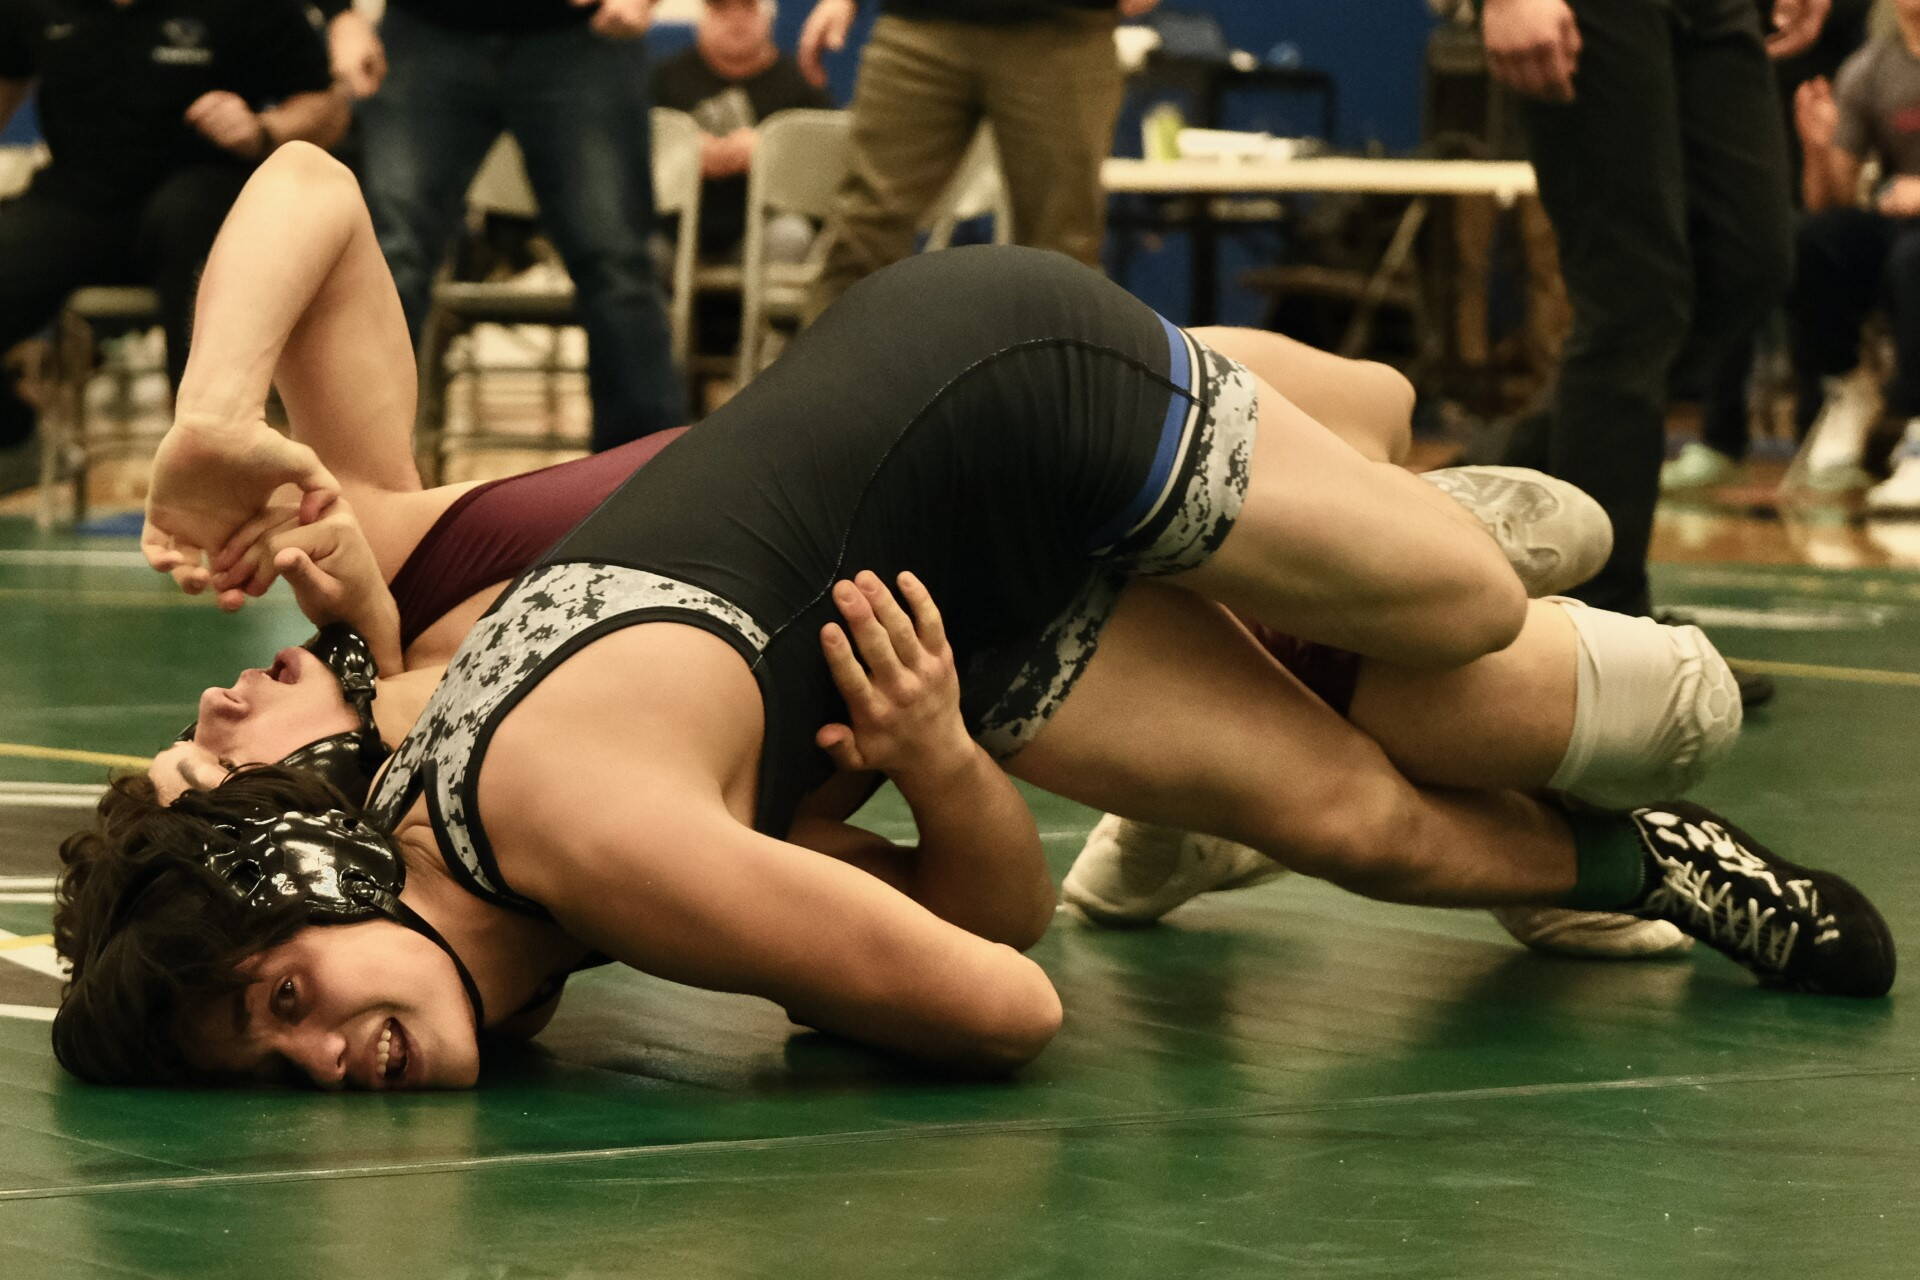 Thunder Mountain High School junior Hayden Aube attempts to pin Ketchikan High School sophomore Cayden Harney in the 145-pound Division I championship match of the 2023 ASAA Region V wrestling tournament Saturday at TMHS. Aube won by 16-6 major decision. (Klas Stolpe/ For the Juneau Empire)